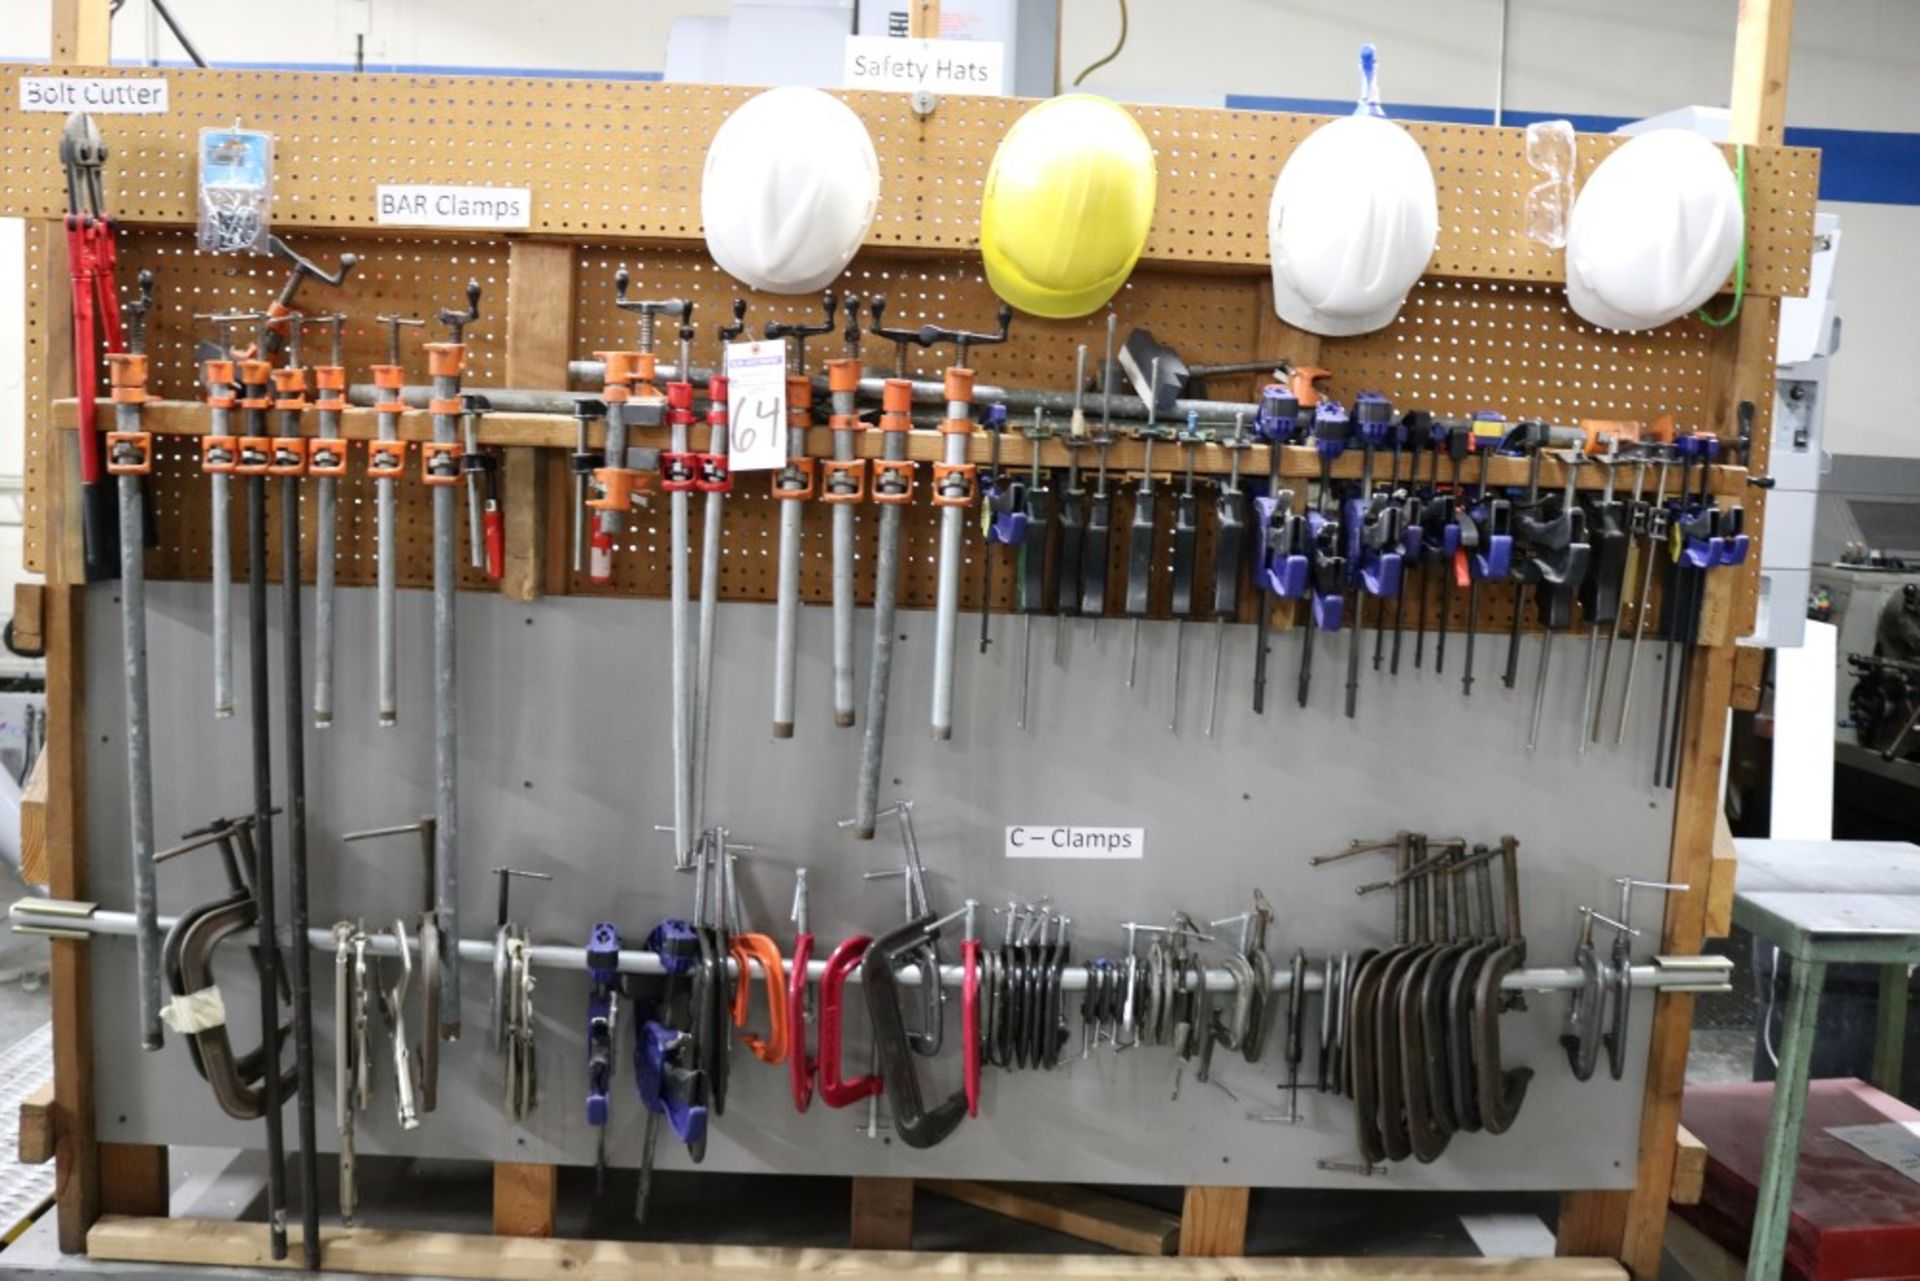 Large Lot of Bar Clamps, Bolt Cutters, Safety Hats, C Clamps, Vise Grips and Quick Grips of - Image 9 of 10